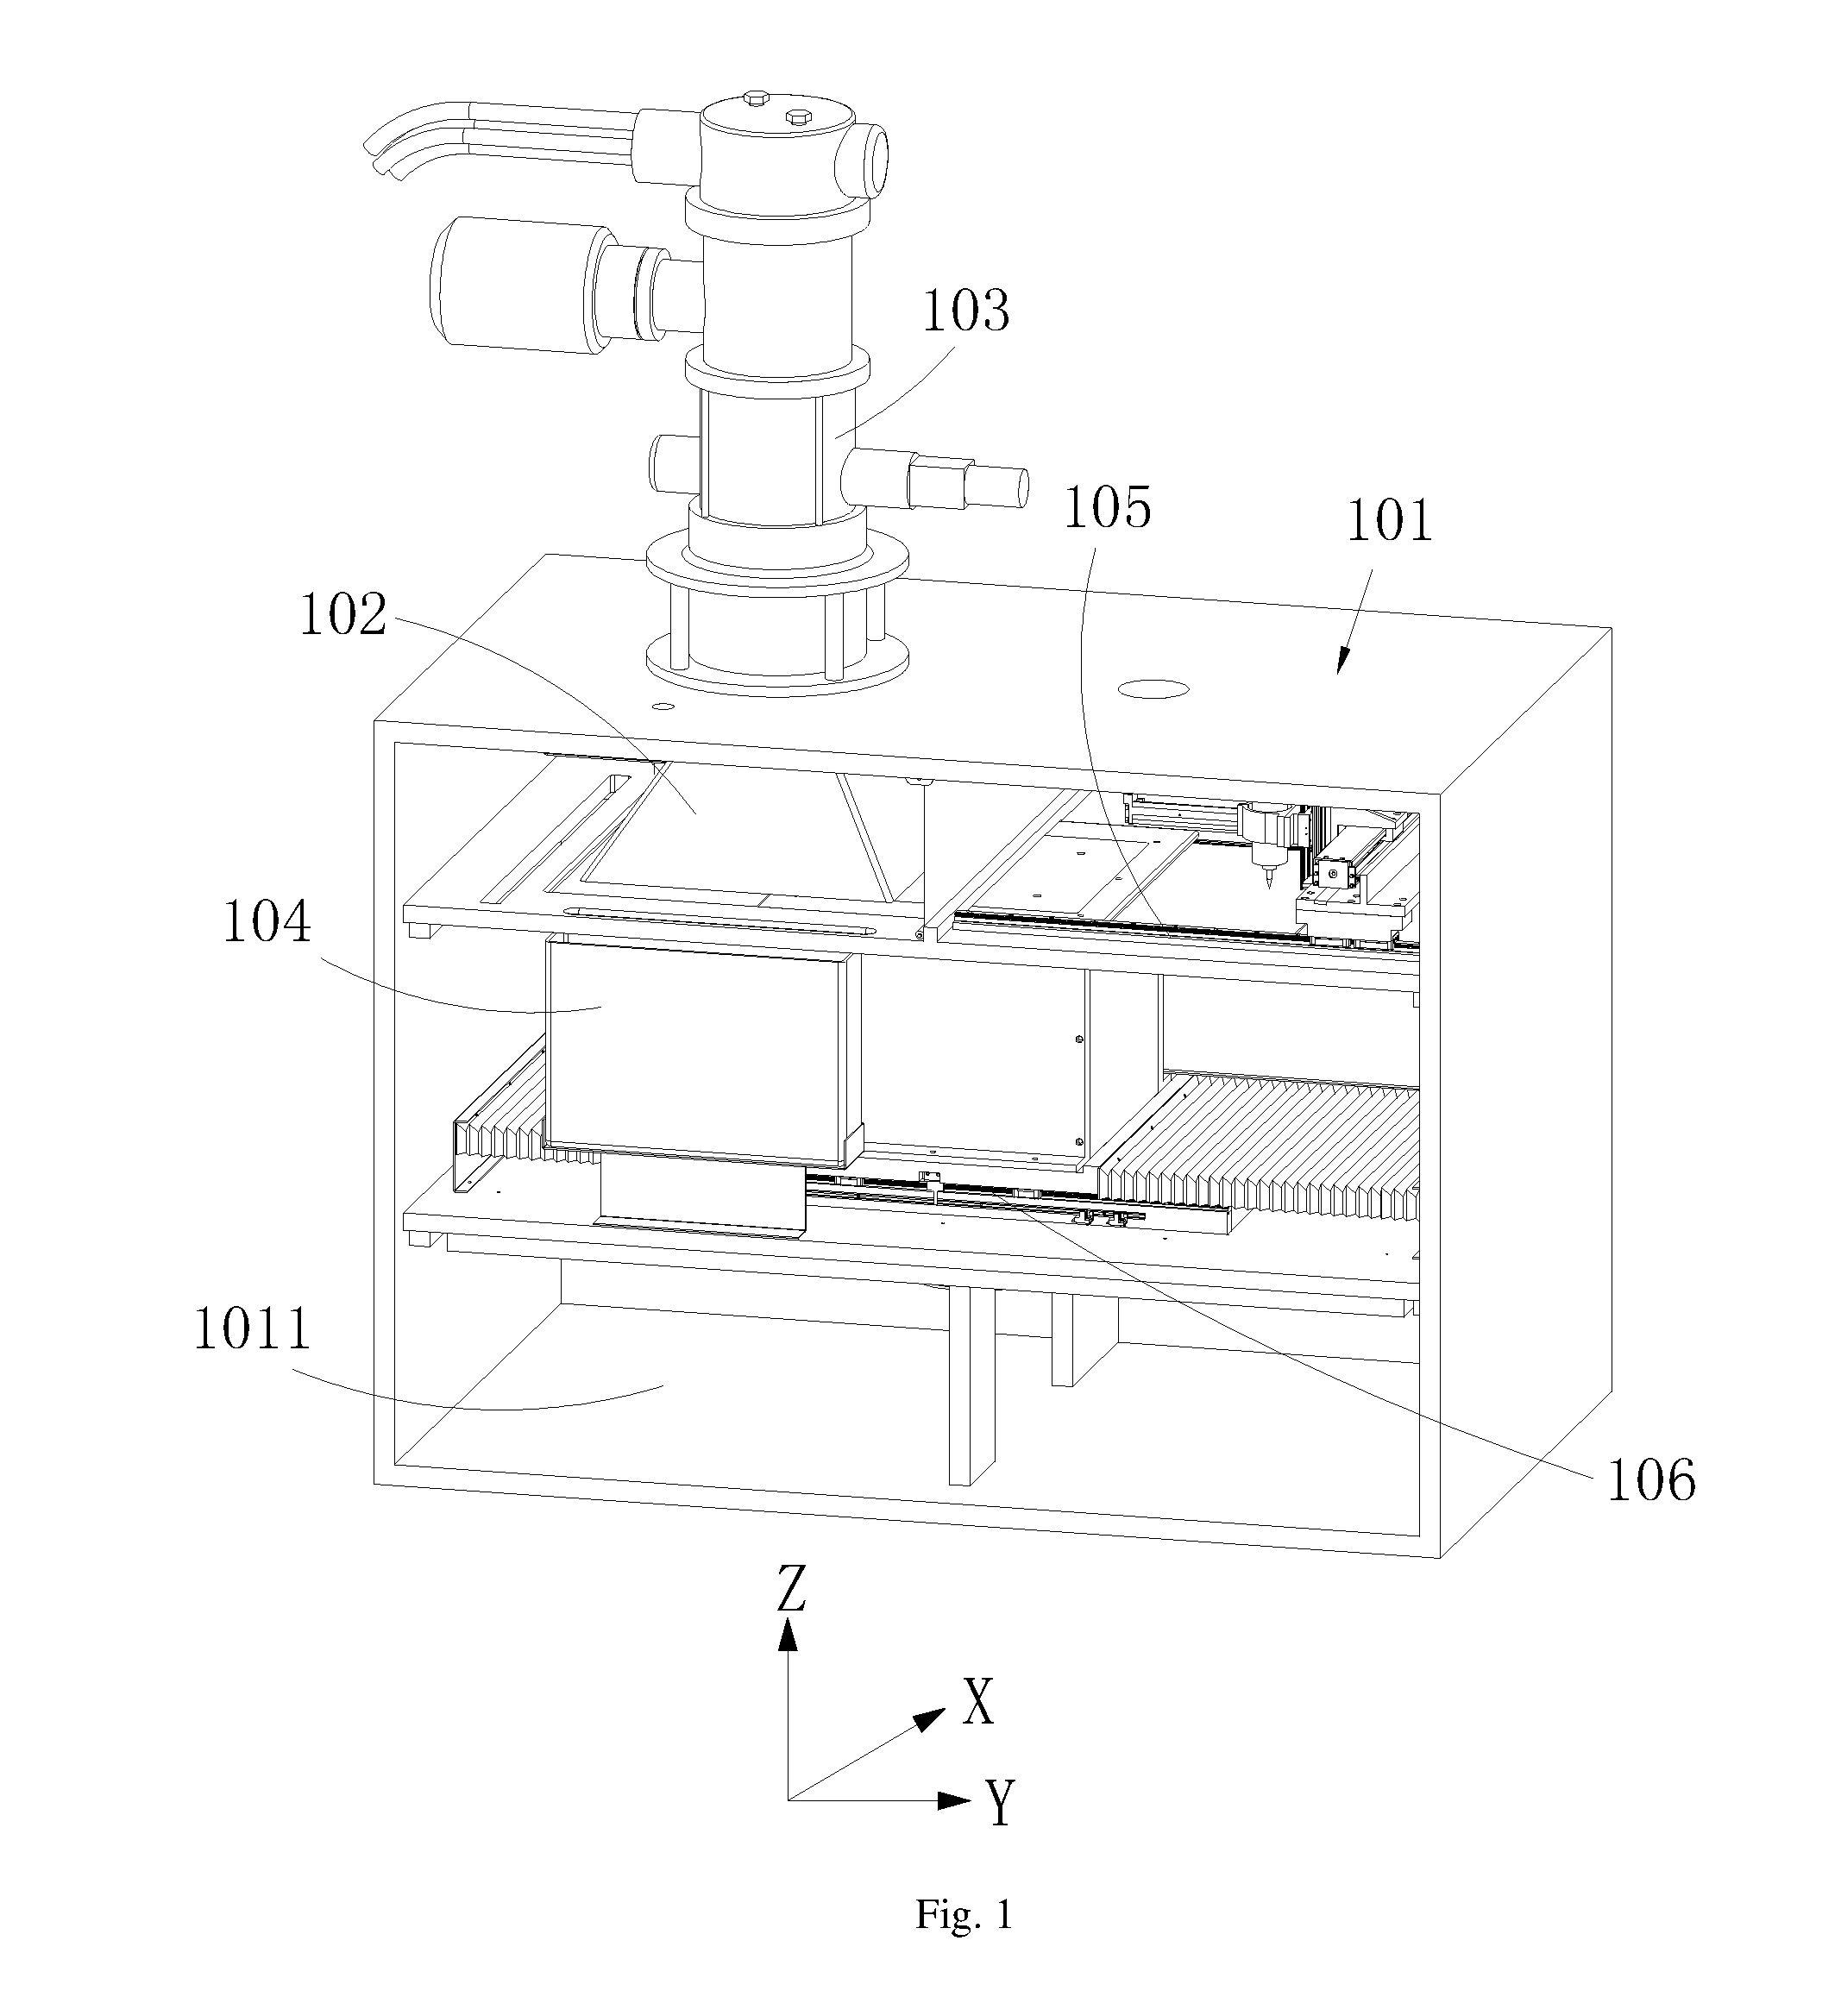 Electron beam melting and cutting composite 3D printing apparatus